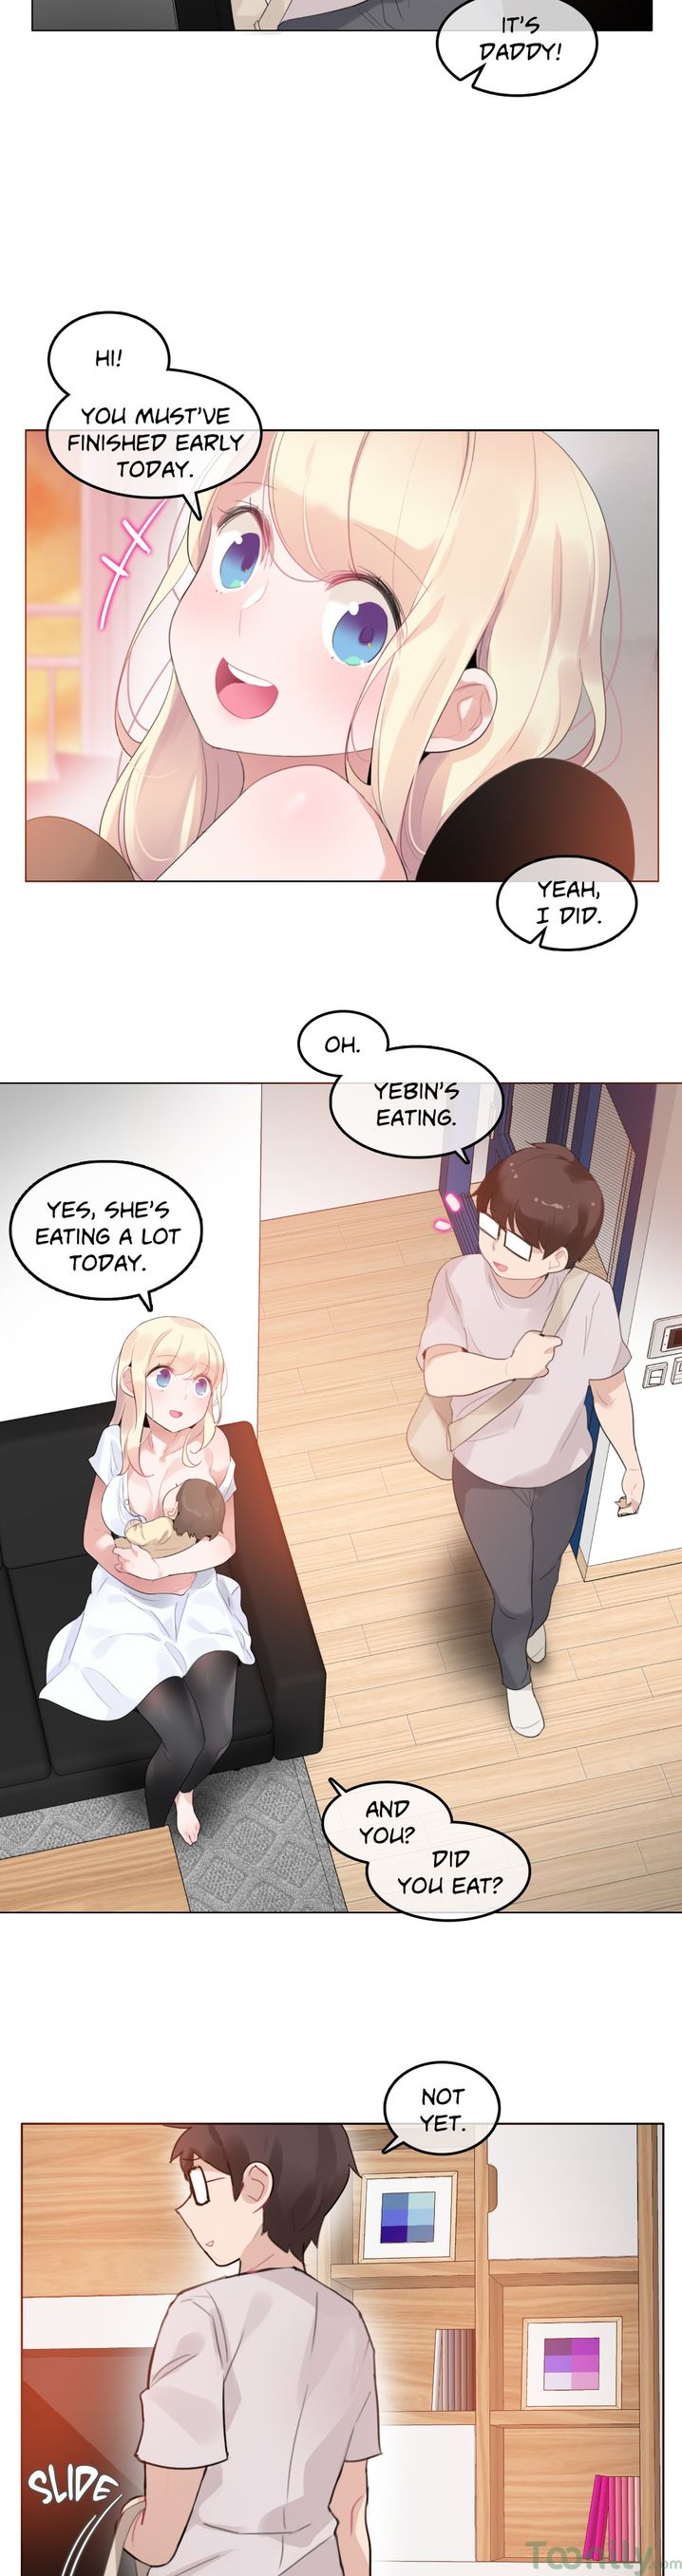 A Pervert’s Daily Life - Chapter 59 Page 2